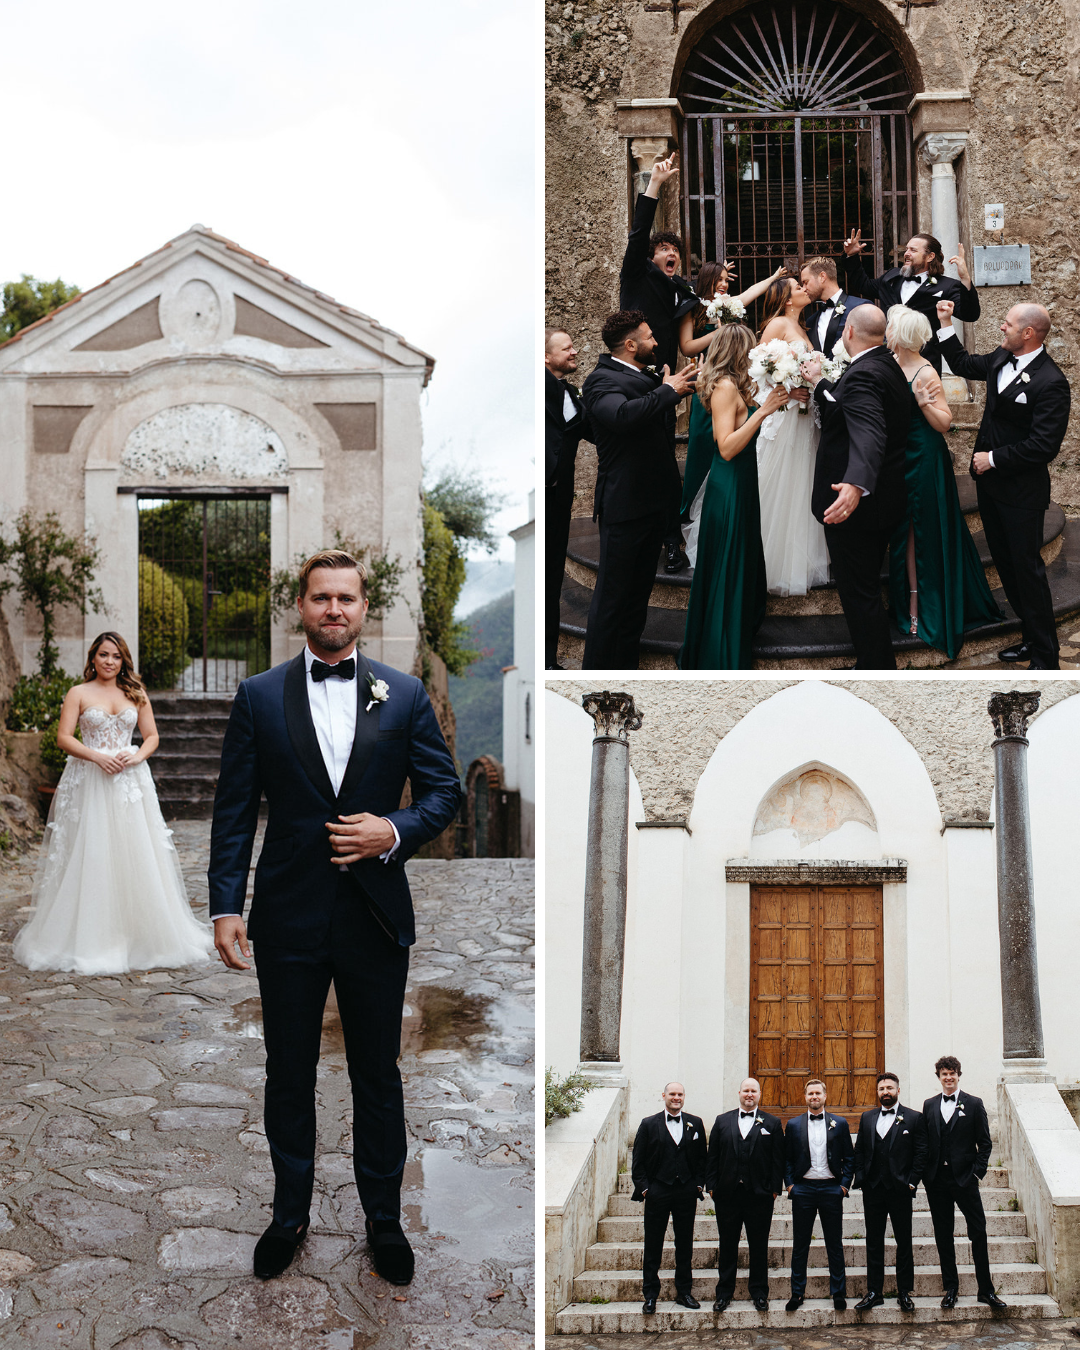 Bride and groom in front of church in Italy with wedding party